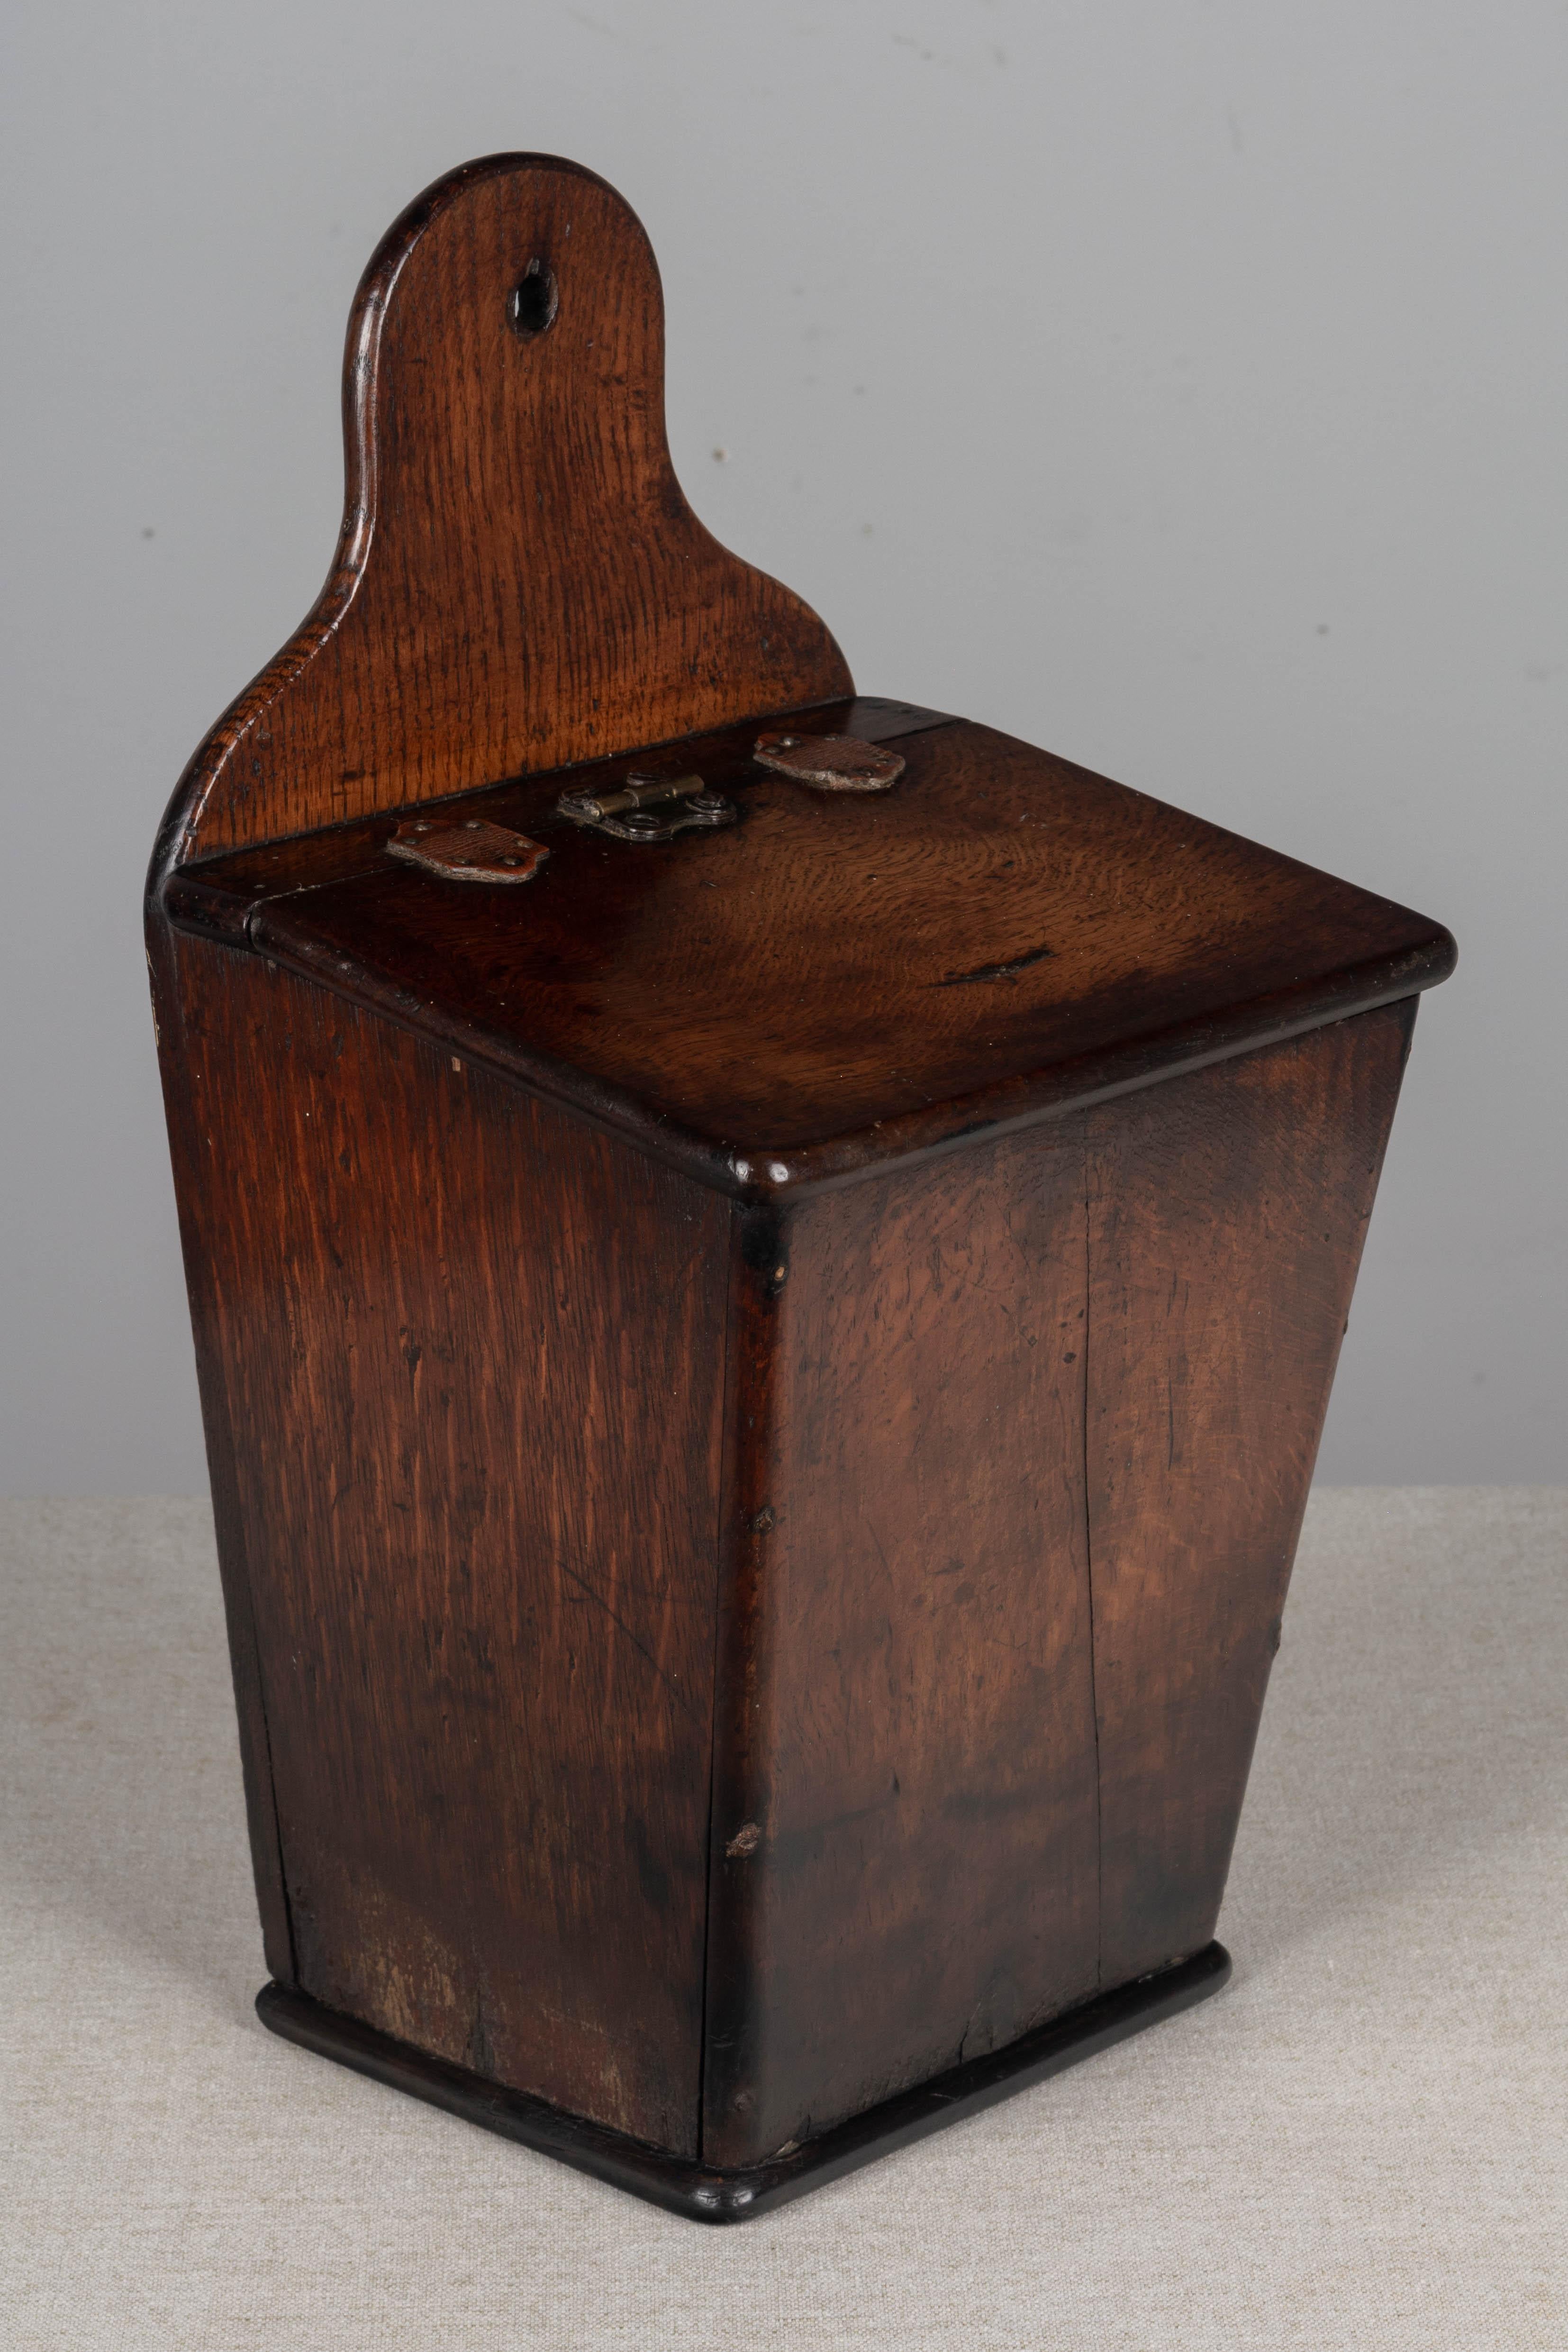 An early 19th century French boite à sel, or salt box, made of solid oak. Hinged lid with tacked leather tabs. A simple handcrafted box with nice proportions and beautiful patina. This box was used to store salt and would have been hung on the